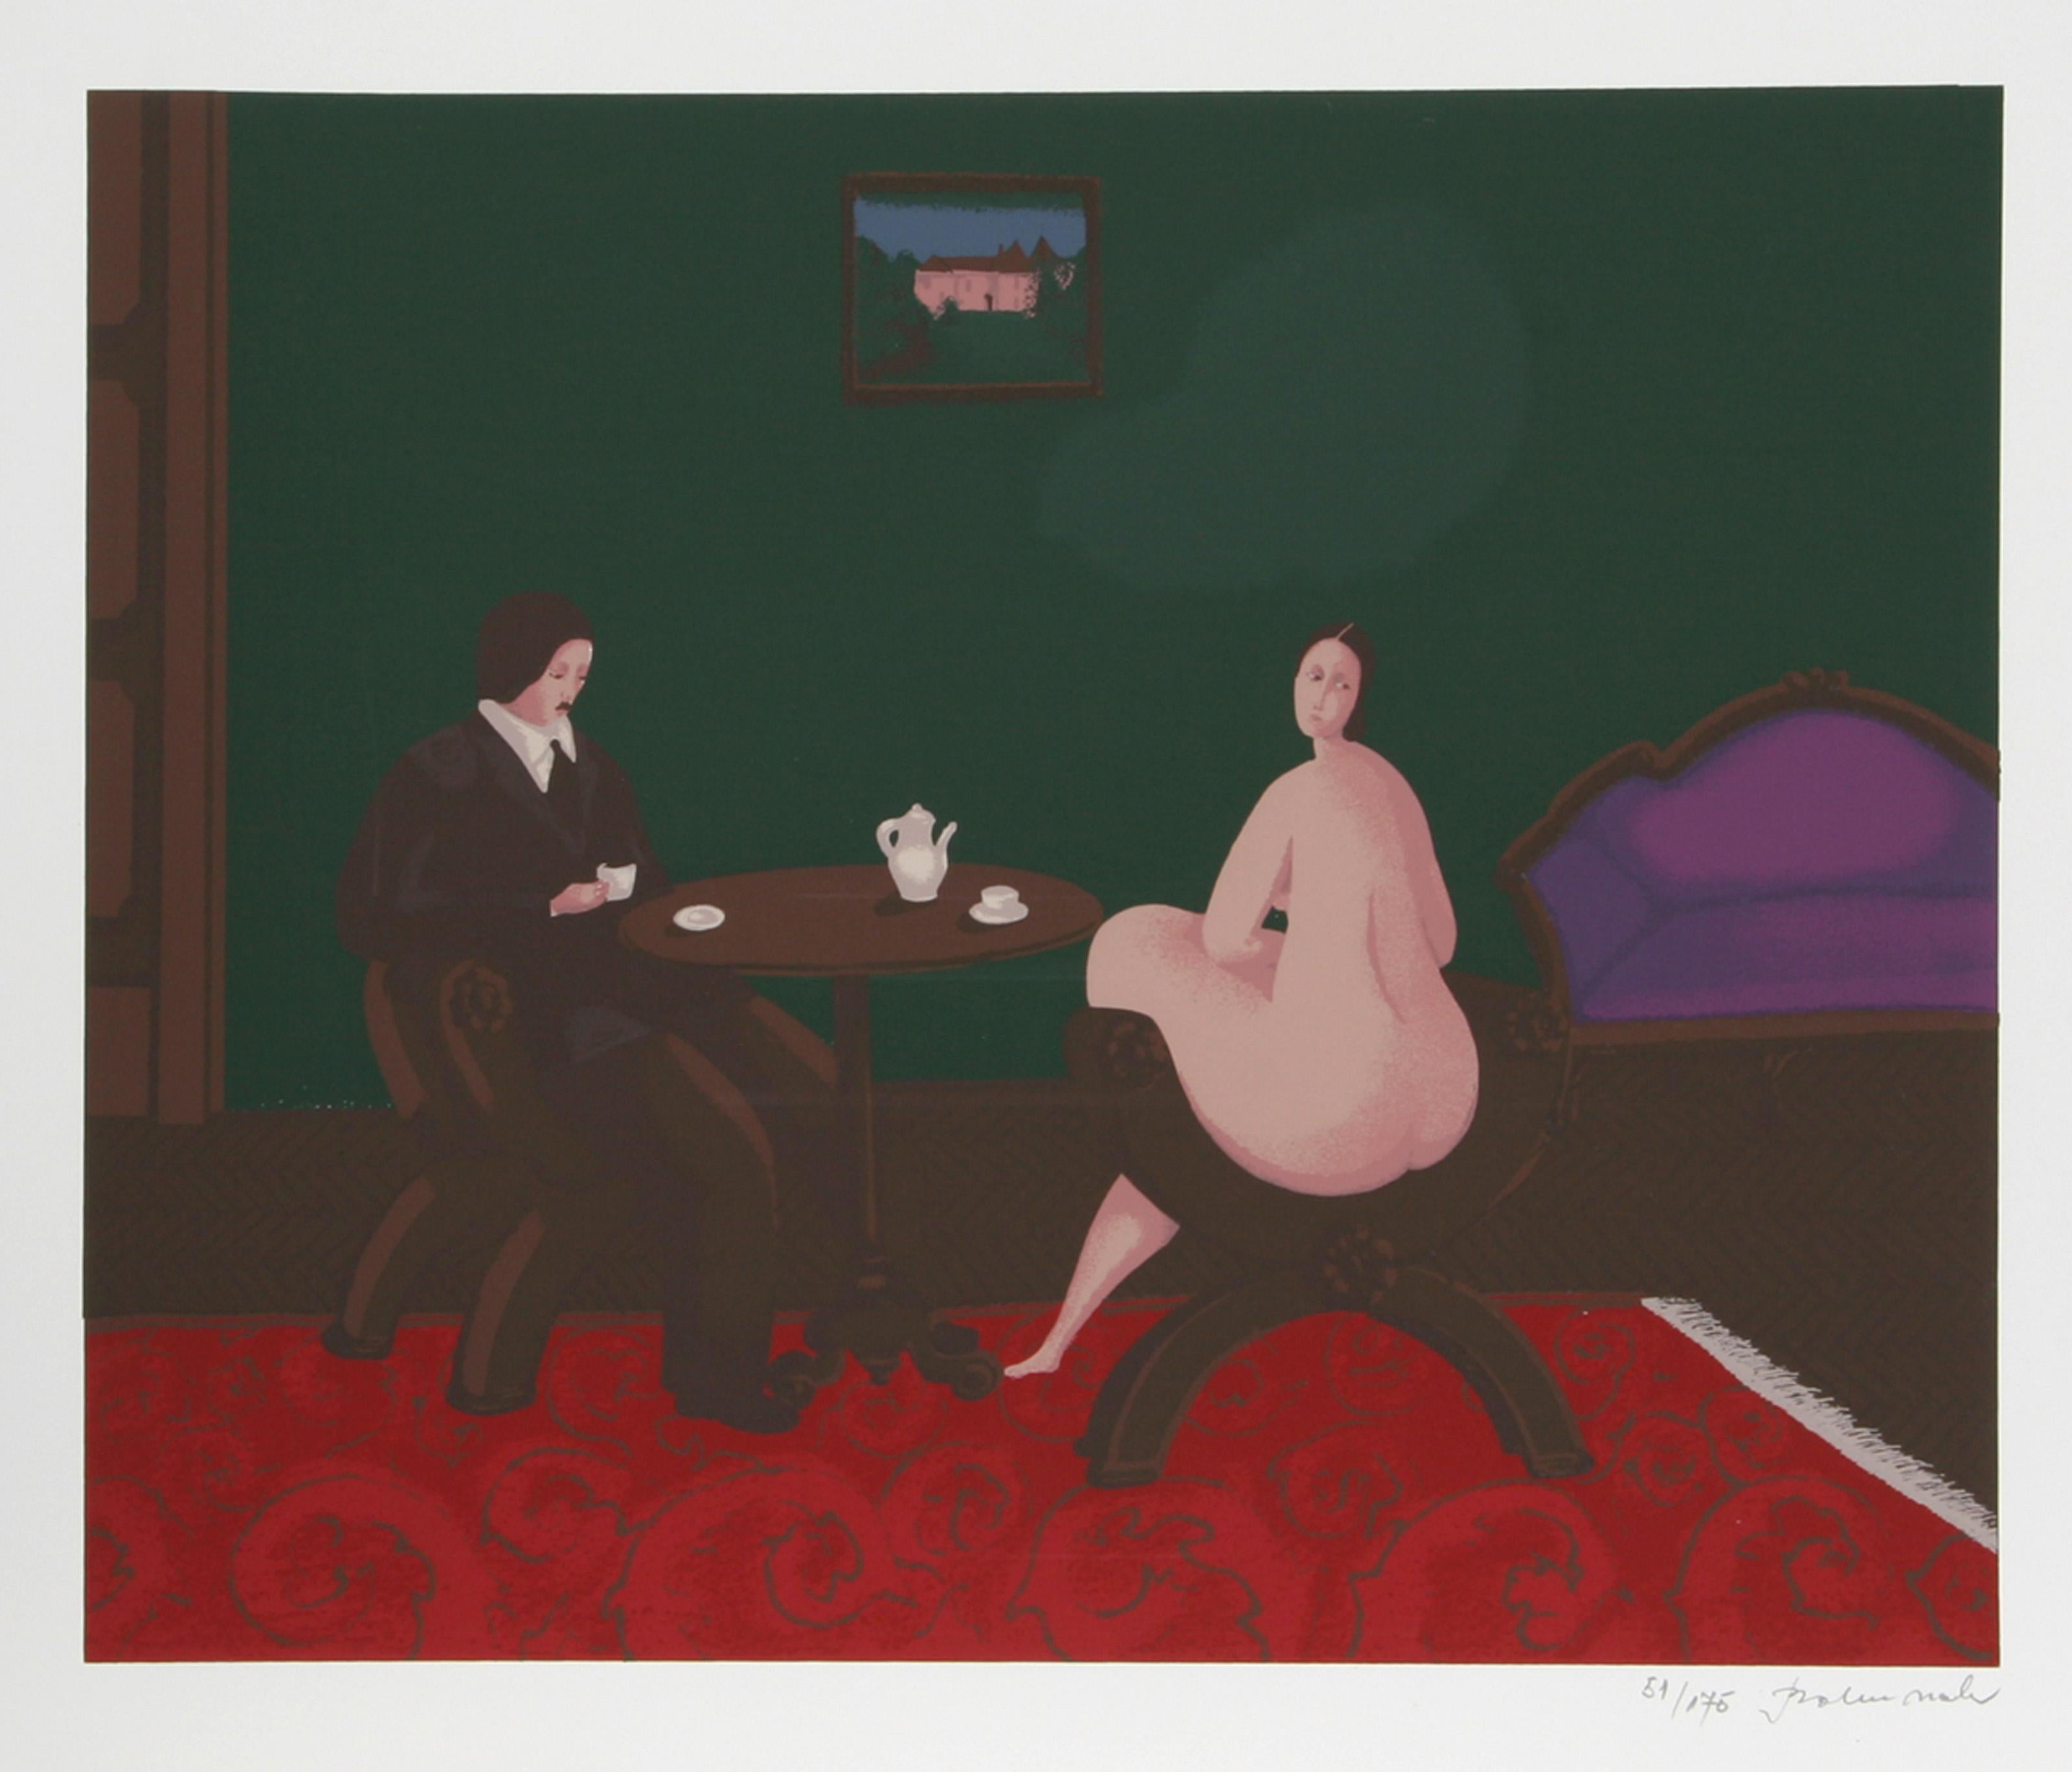 Branko Bahunek, Croatian (1935 - ) -  Tea Time. Medium: Screenprint, signed and numbered in pencil, Edition: 175, Image Size: 16 x 19.5 inches, Size: 19.5 in. x 27.5 in. (49.53 cm x 69.85 cm) 